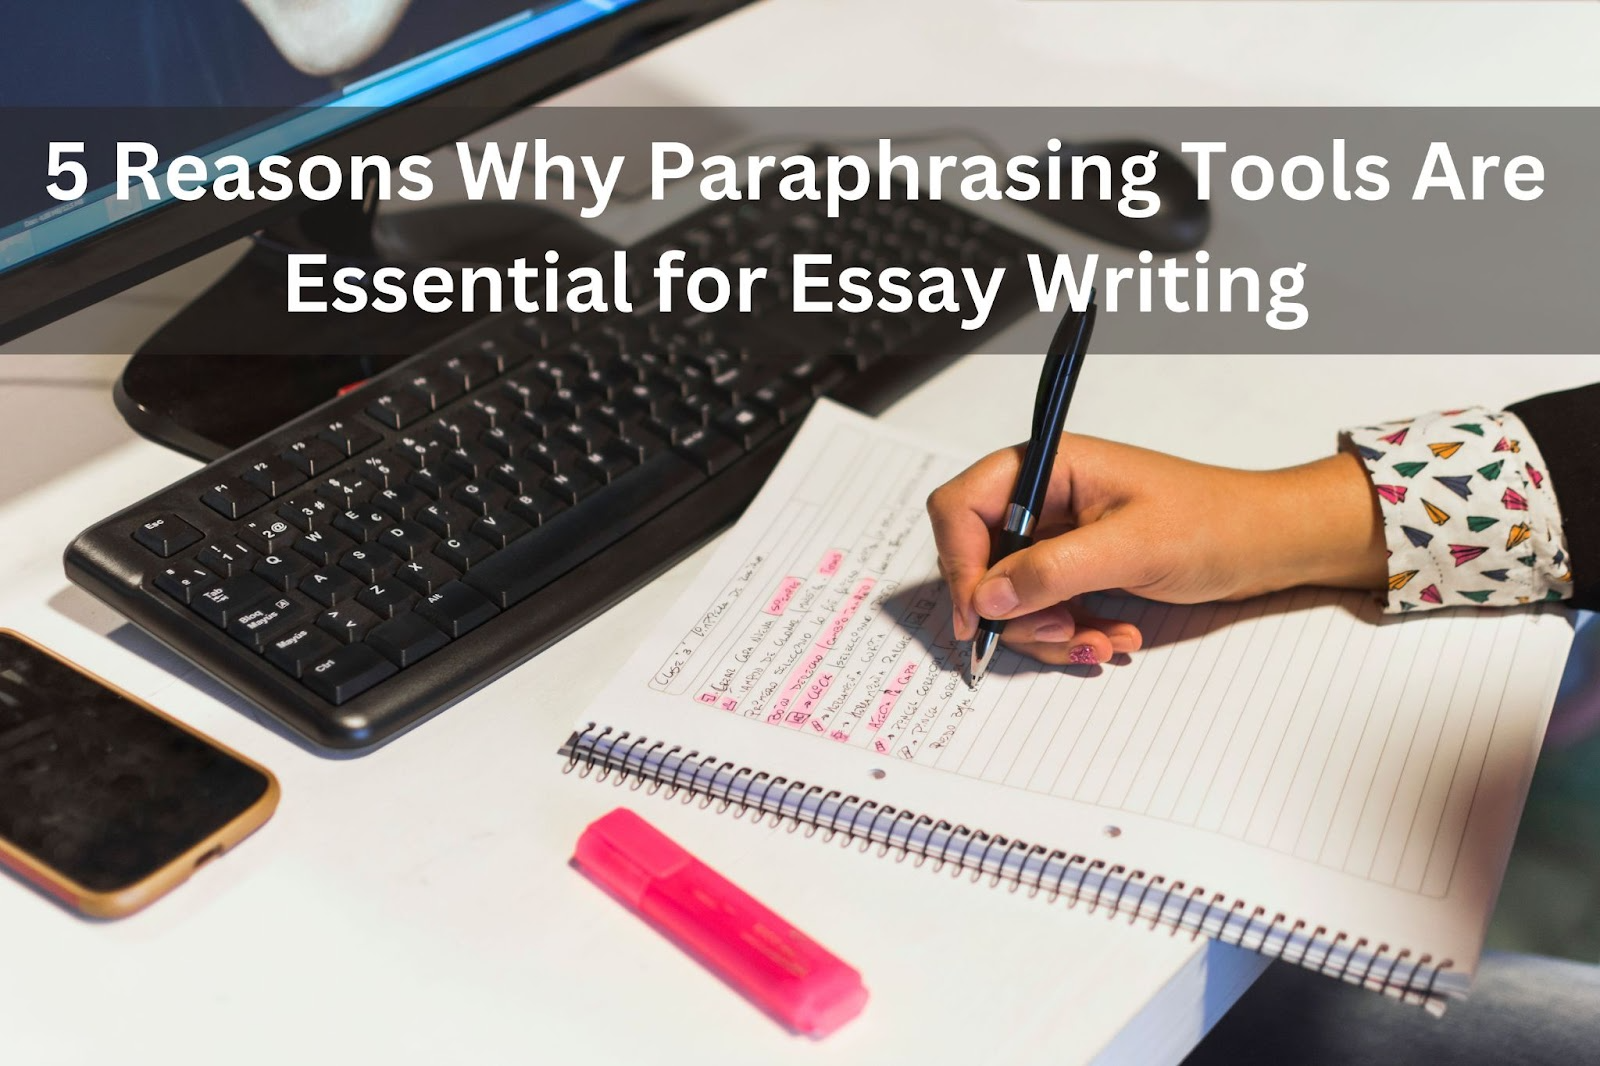 Reasons Why Paraphrasing Tools Are Essential for Essay Writing